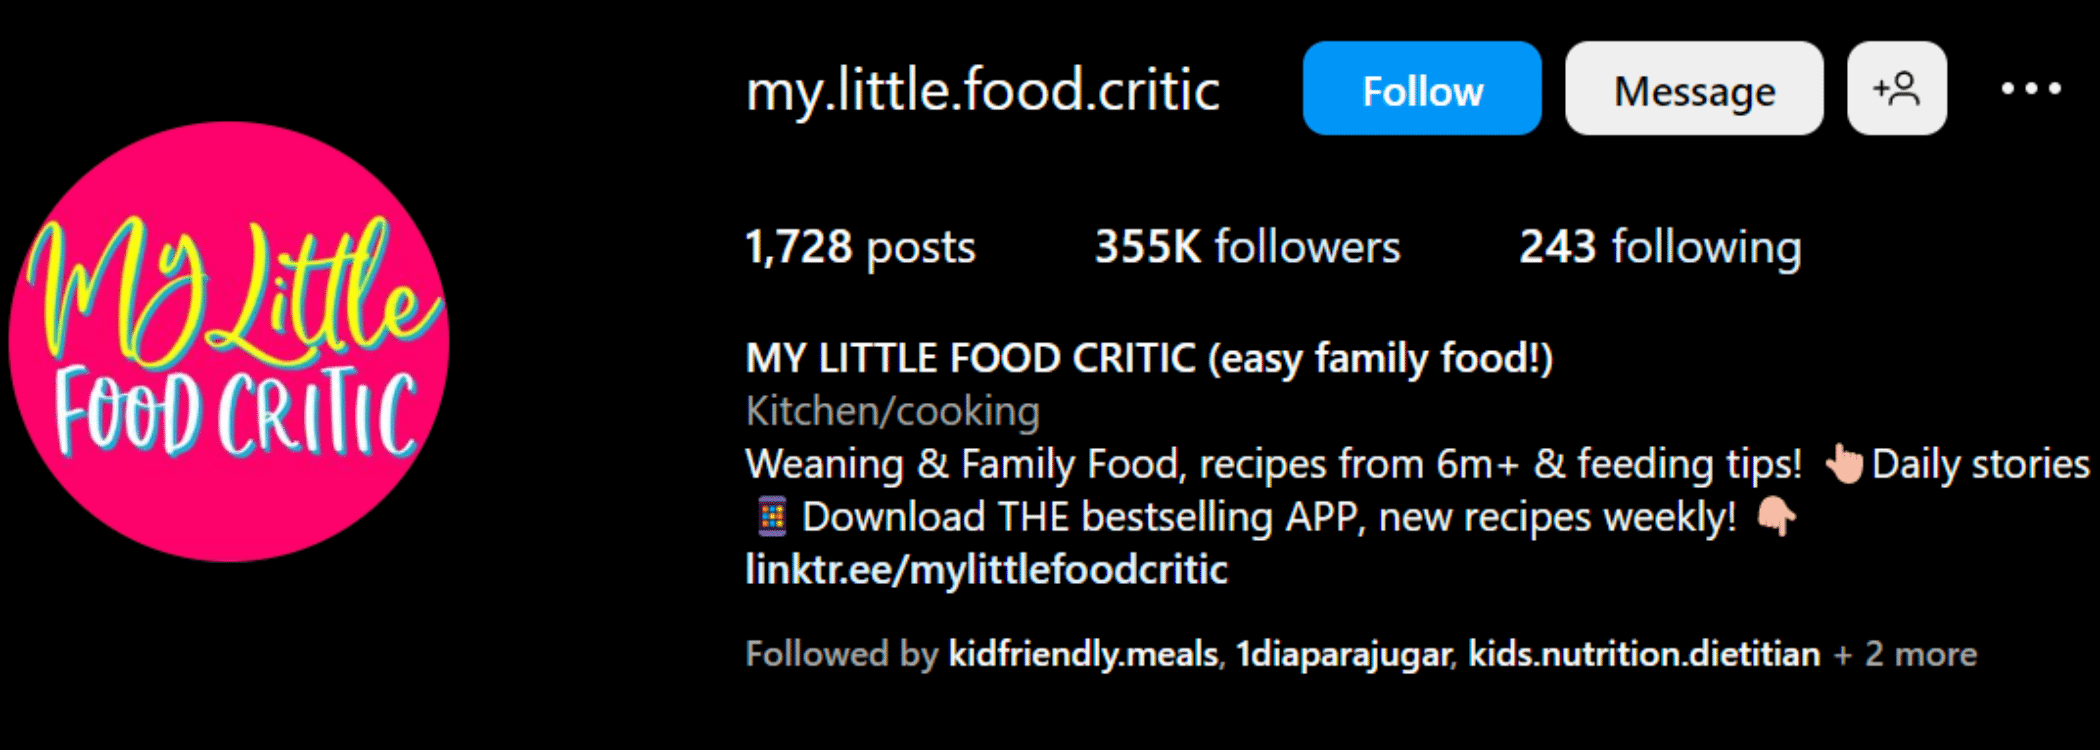 Baby-led-weaning-Instagram-account-@my.little.food.critic